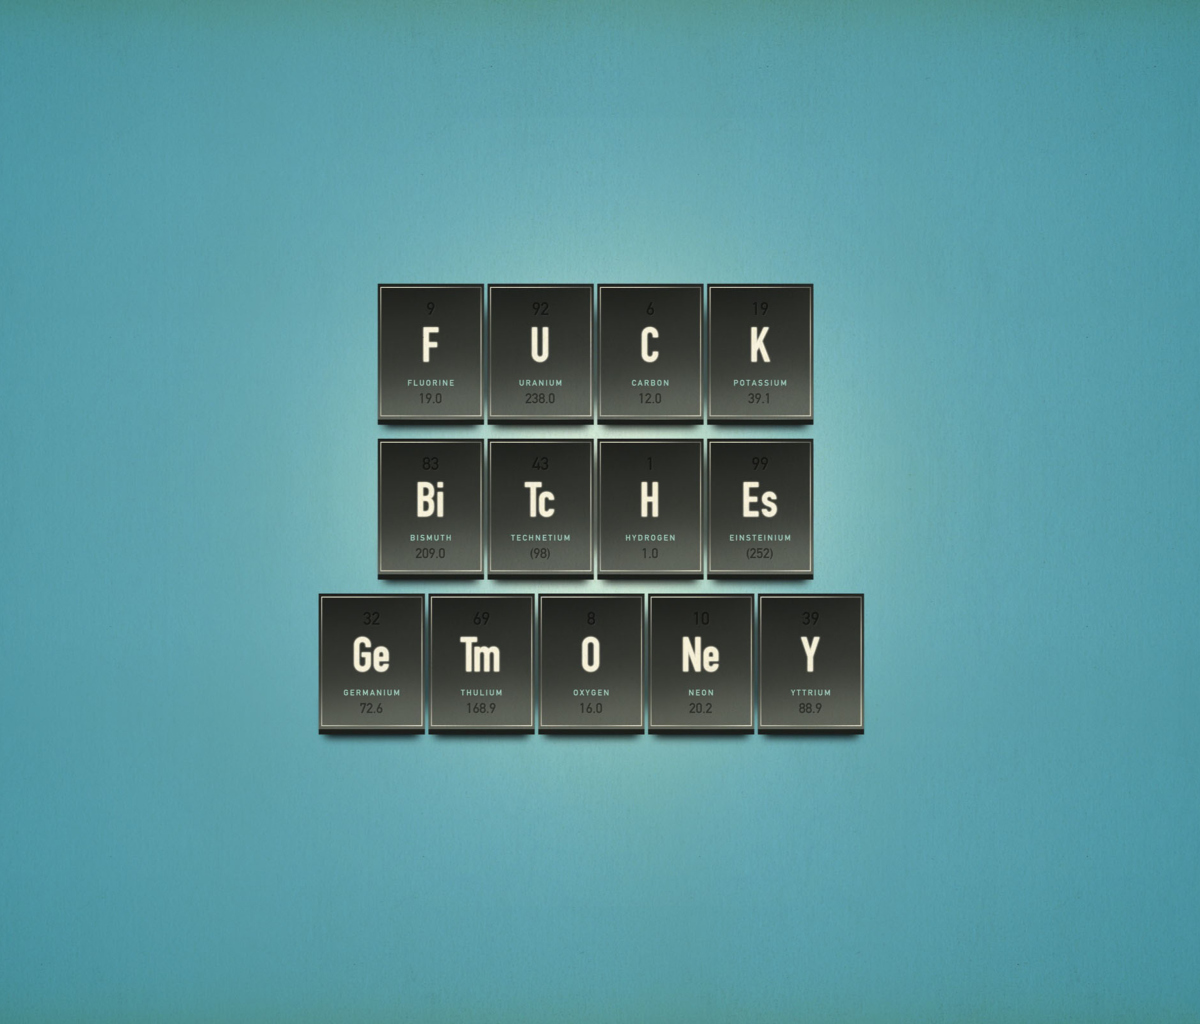 Funny Chemistry Periodic Table screenshot #1 1200x1024